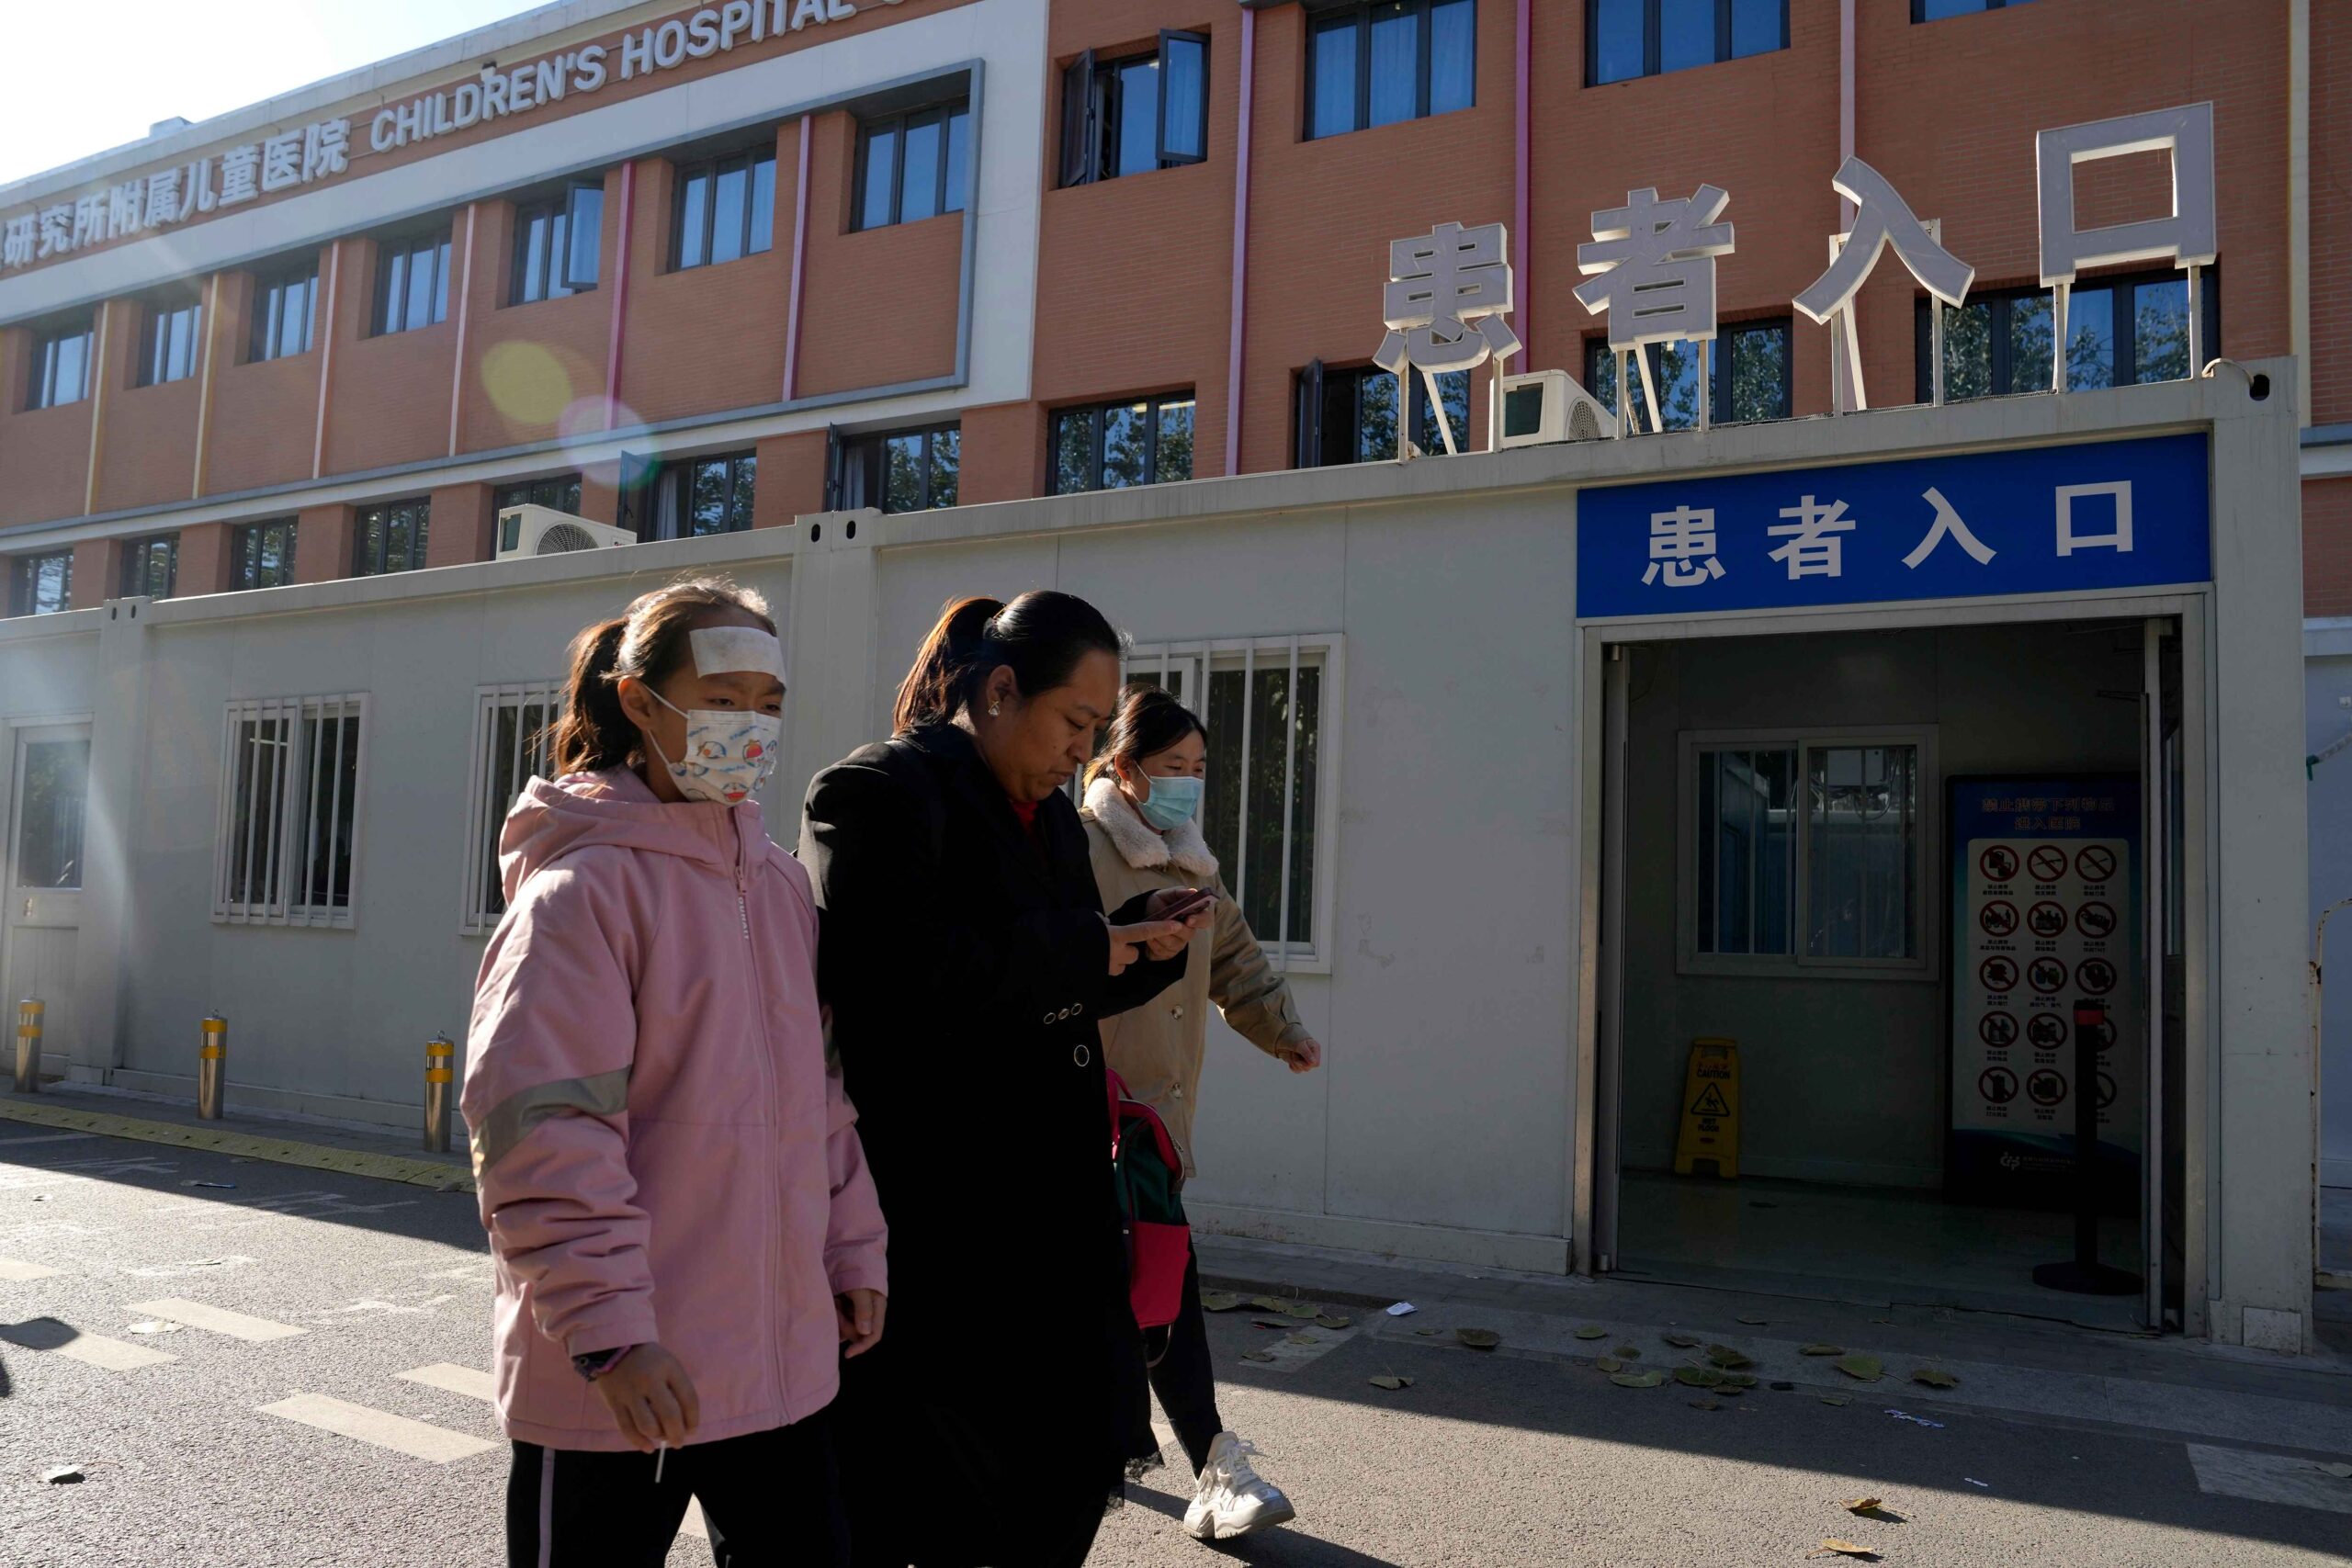 The ‘White Lung’ Syndrome of a ‘mystery pneumonia’ that broke out in China has hit the US, with doctors in Ohio and Massachusetts reporting cases of the illness